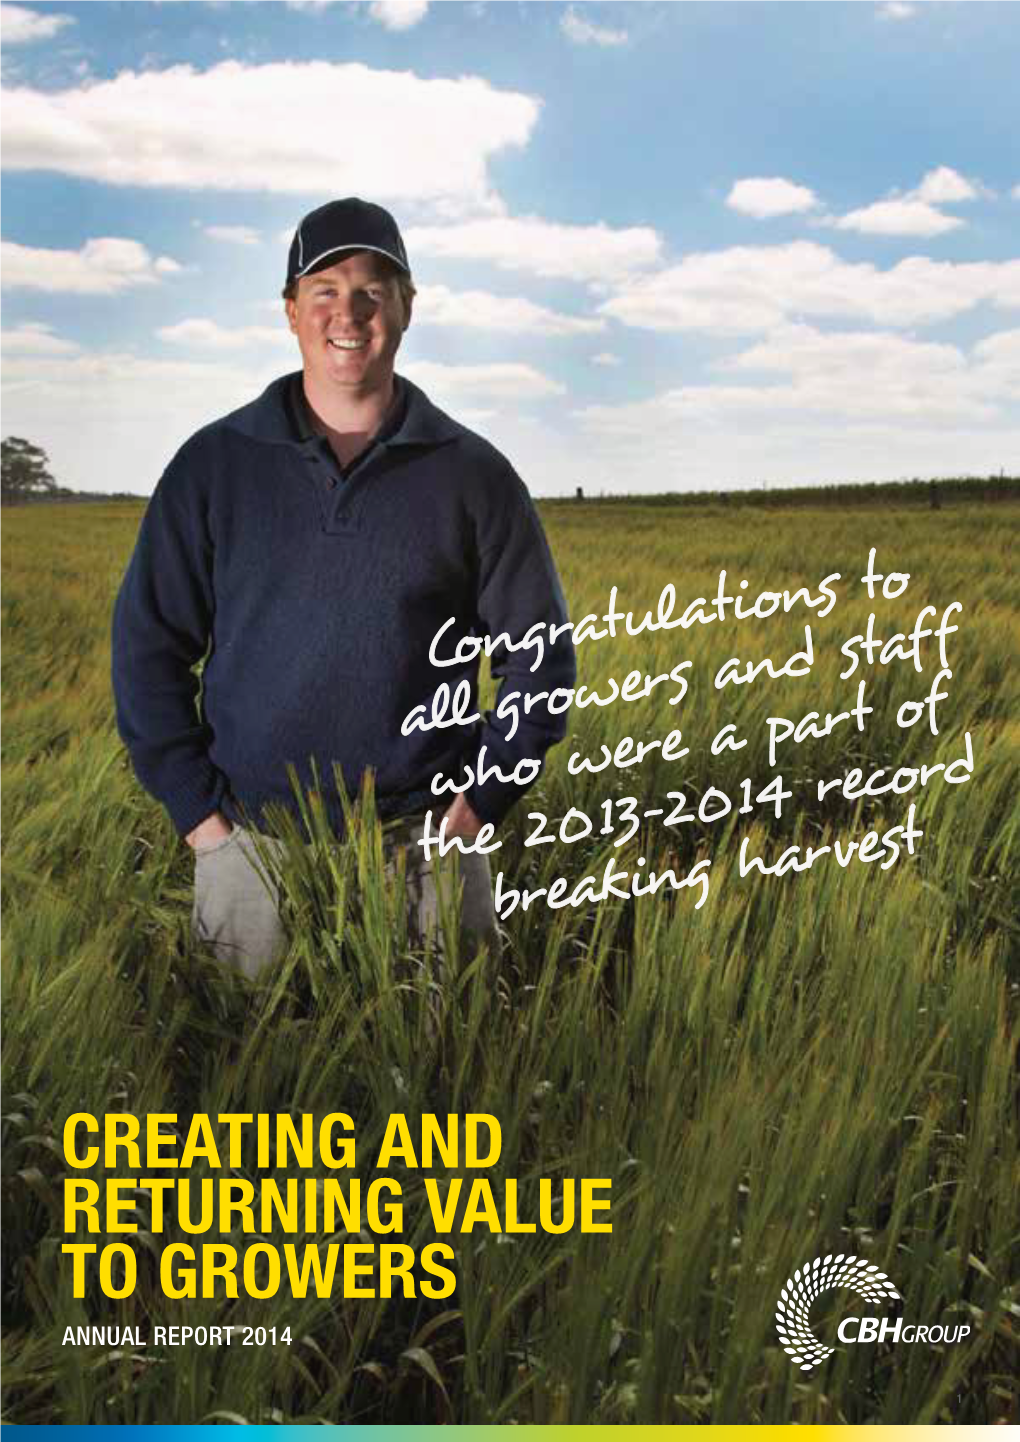 CBH GROUP ANNUAL REPORT 2014 20 OVERVIEW 14 Creating and Returning Value to Growers